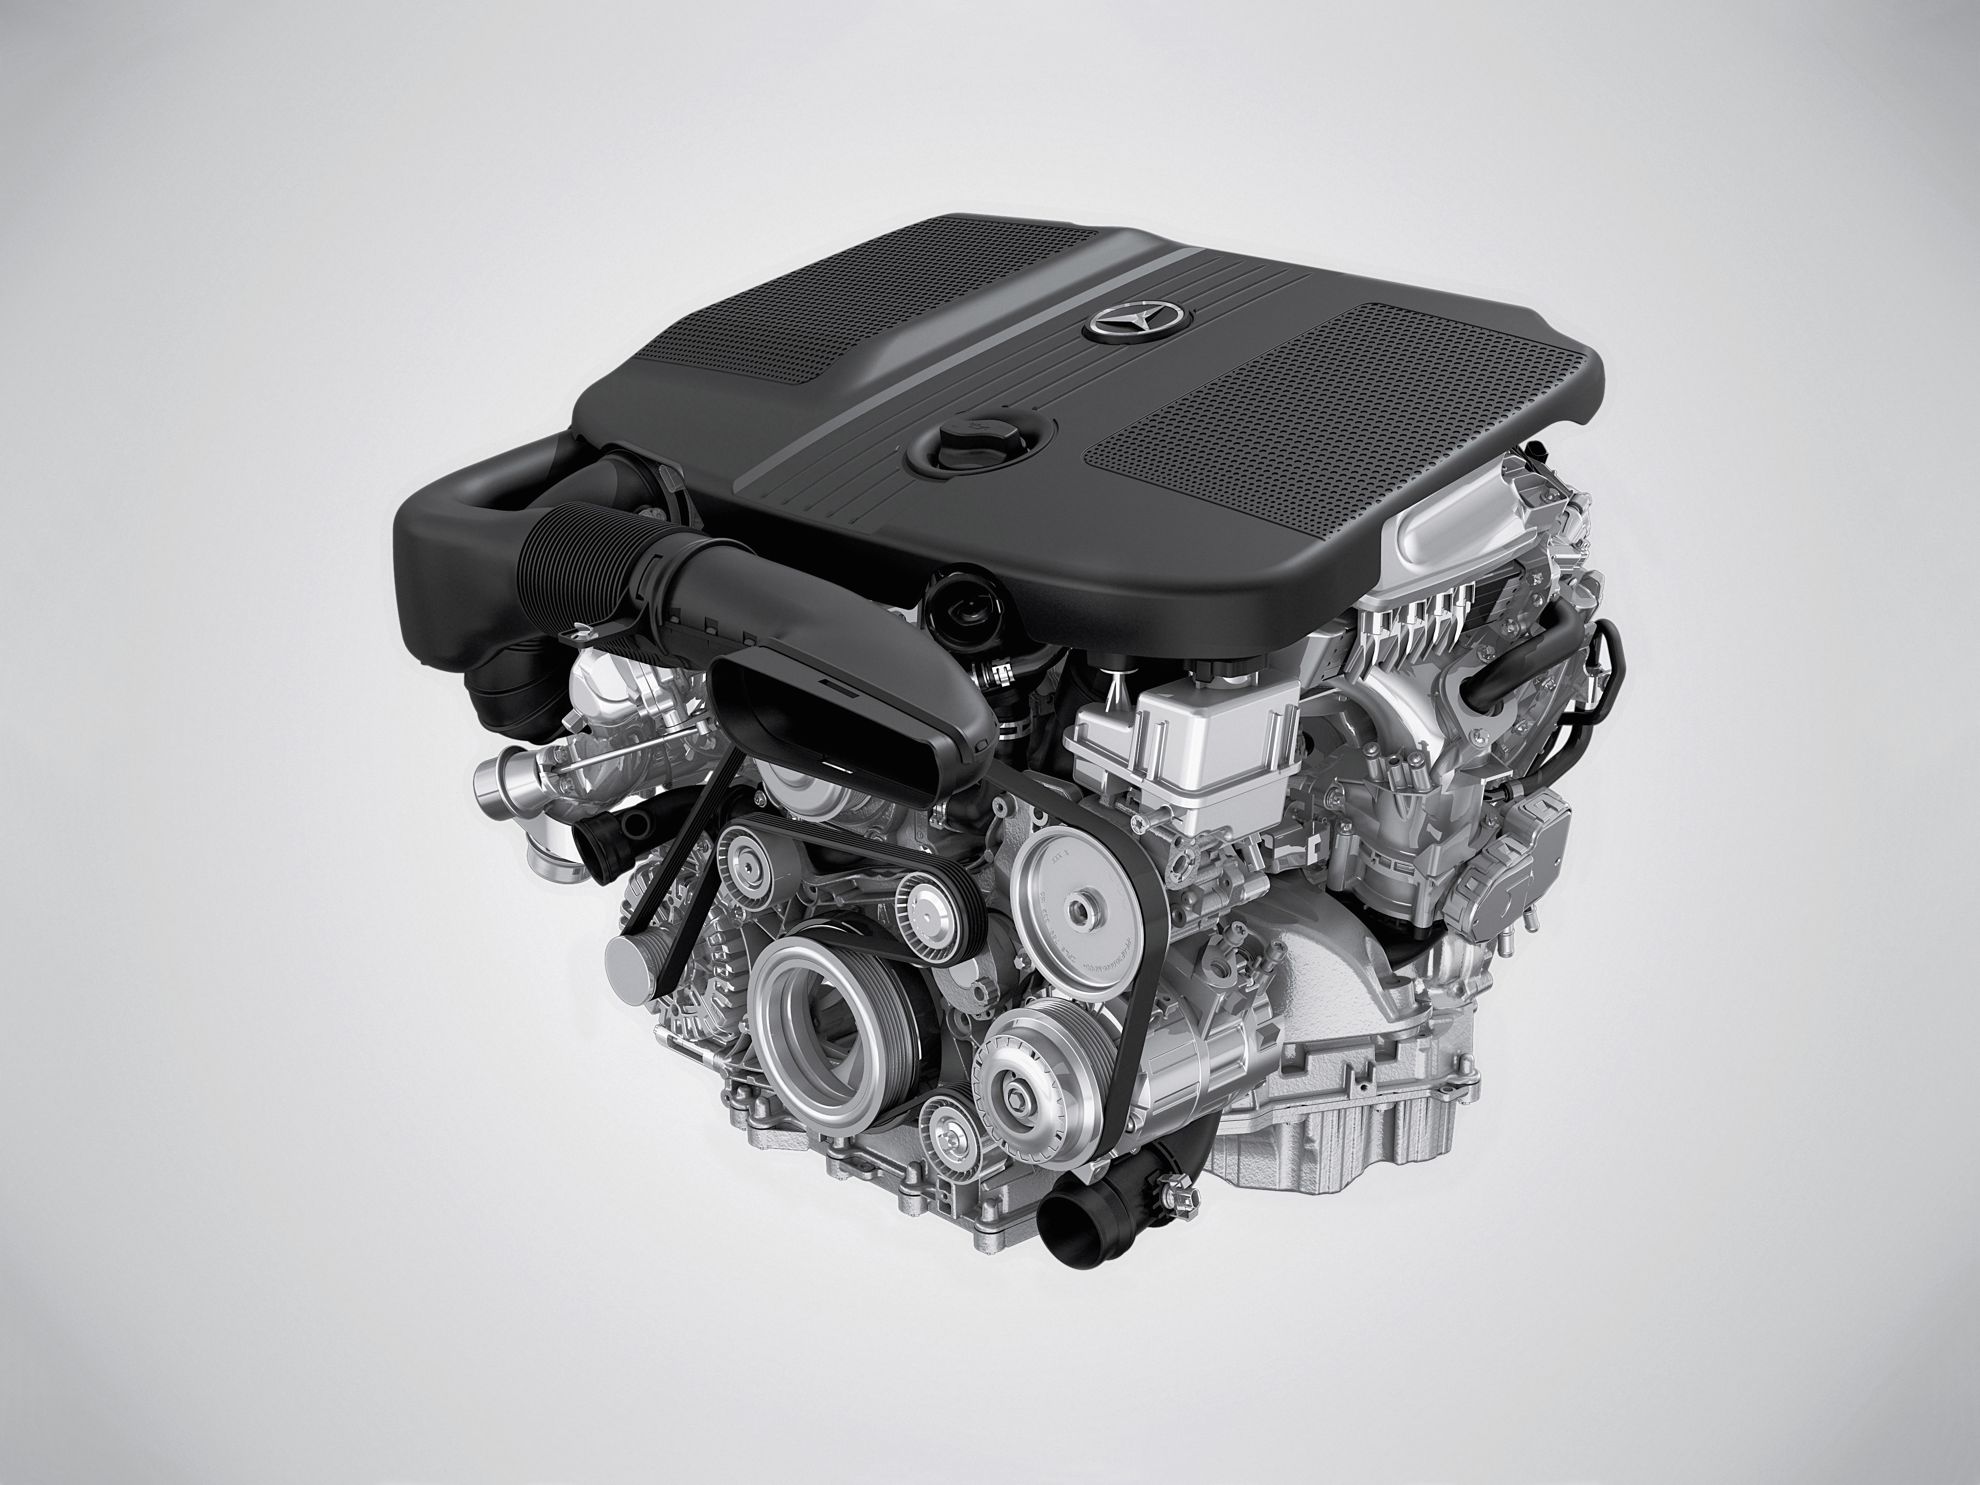 Mercedes-Benz C-Class Engine and drive system